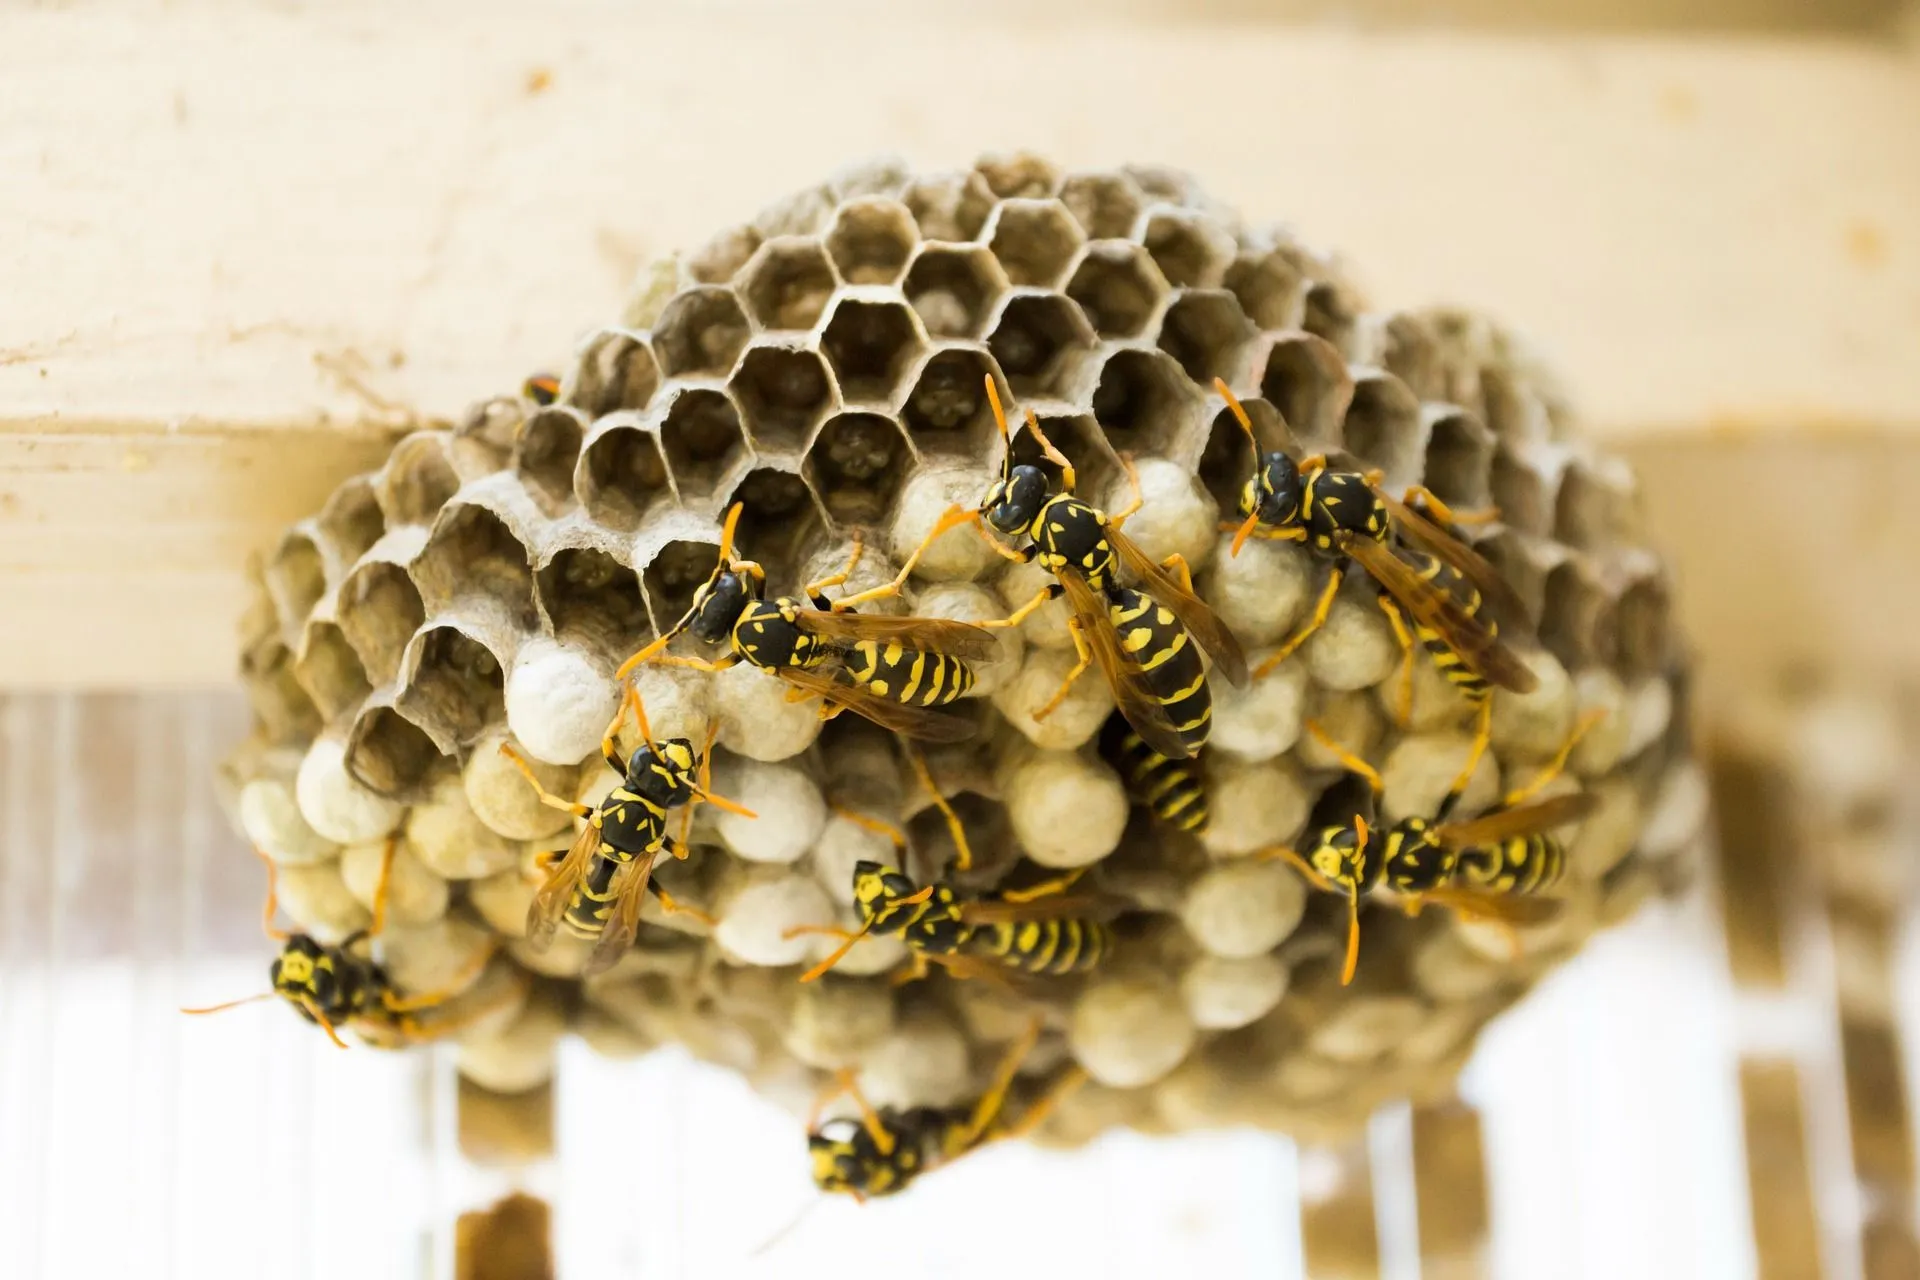 Do Wasps Die After They Sting You? All You Need To Know On Wasp Stings! | Kidadl